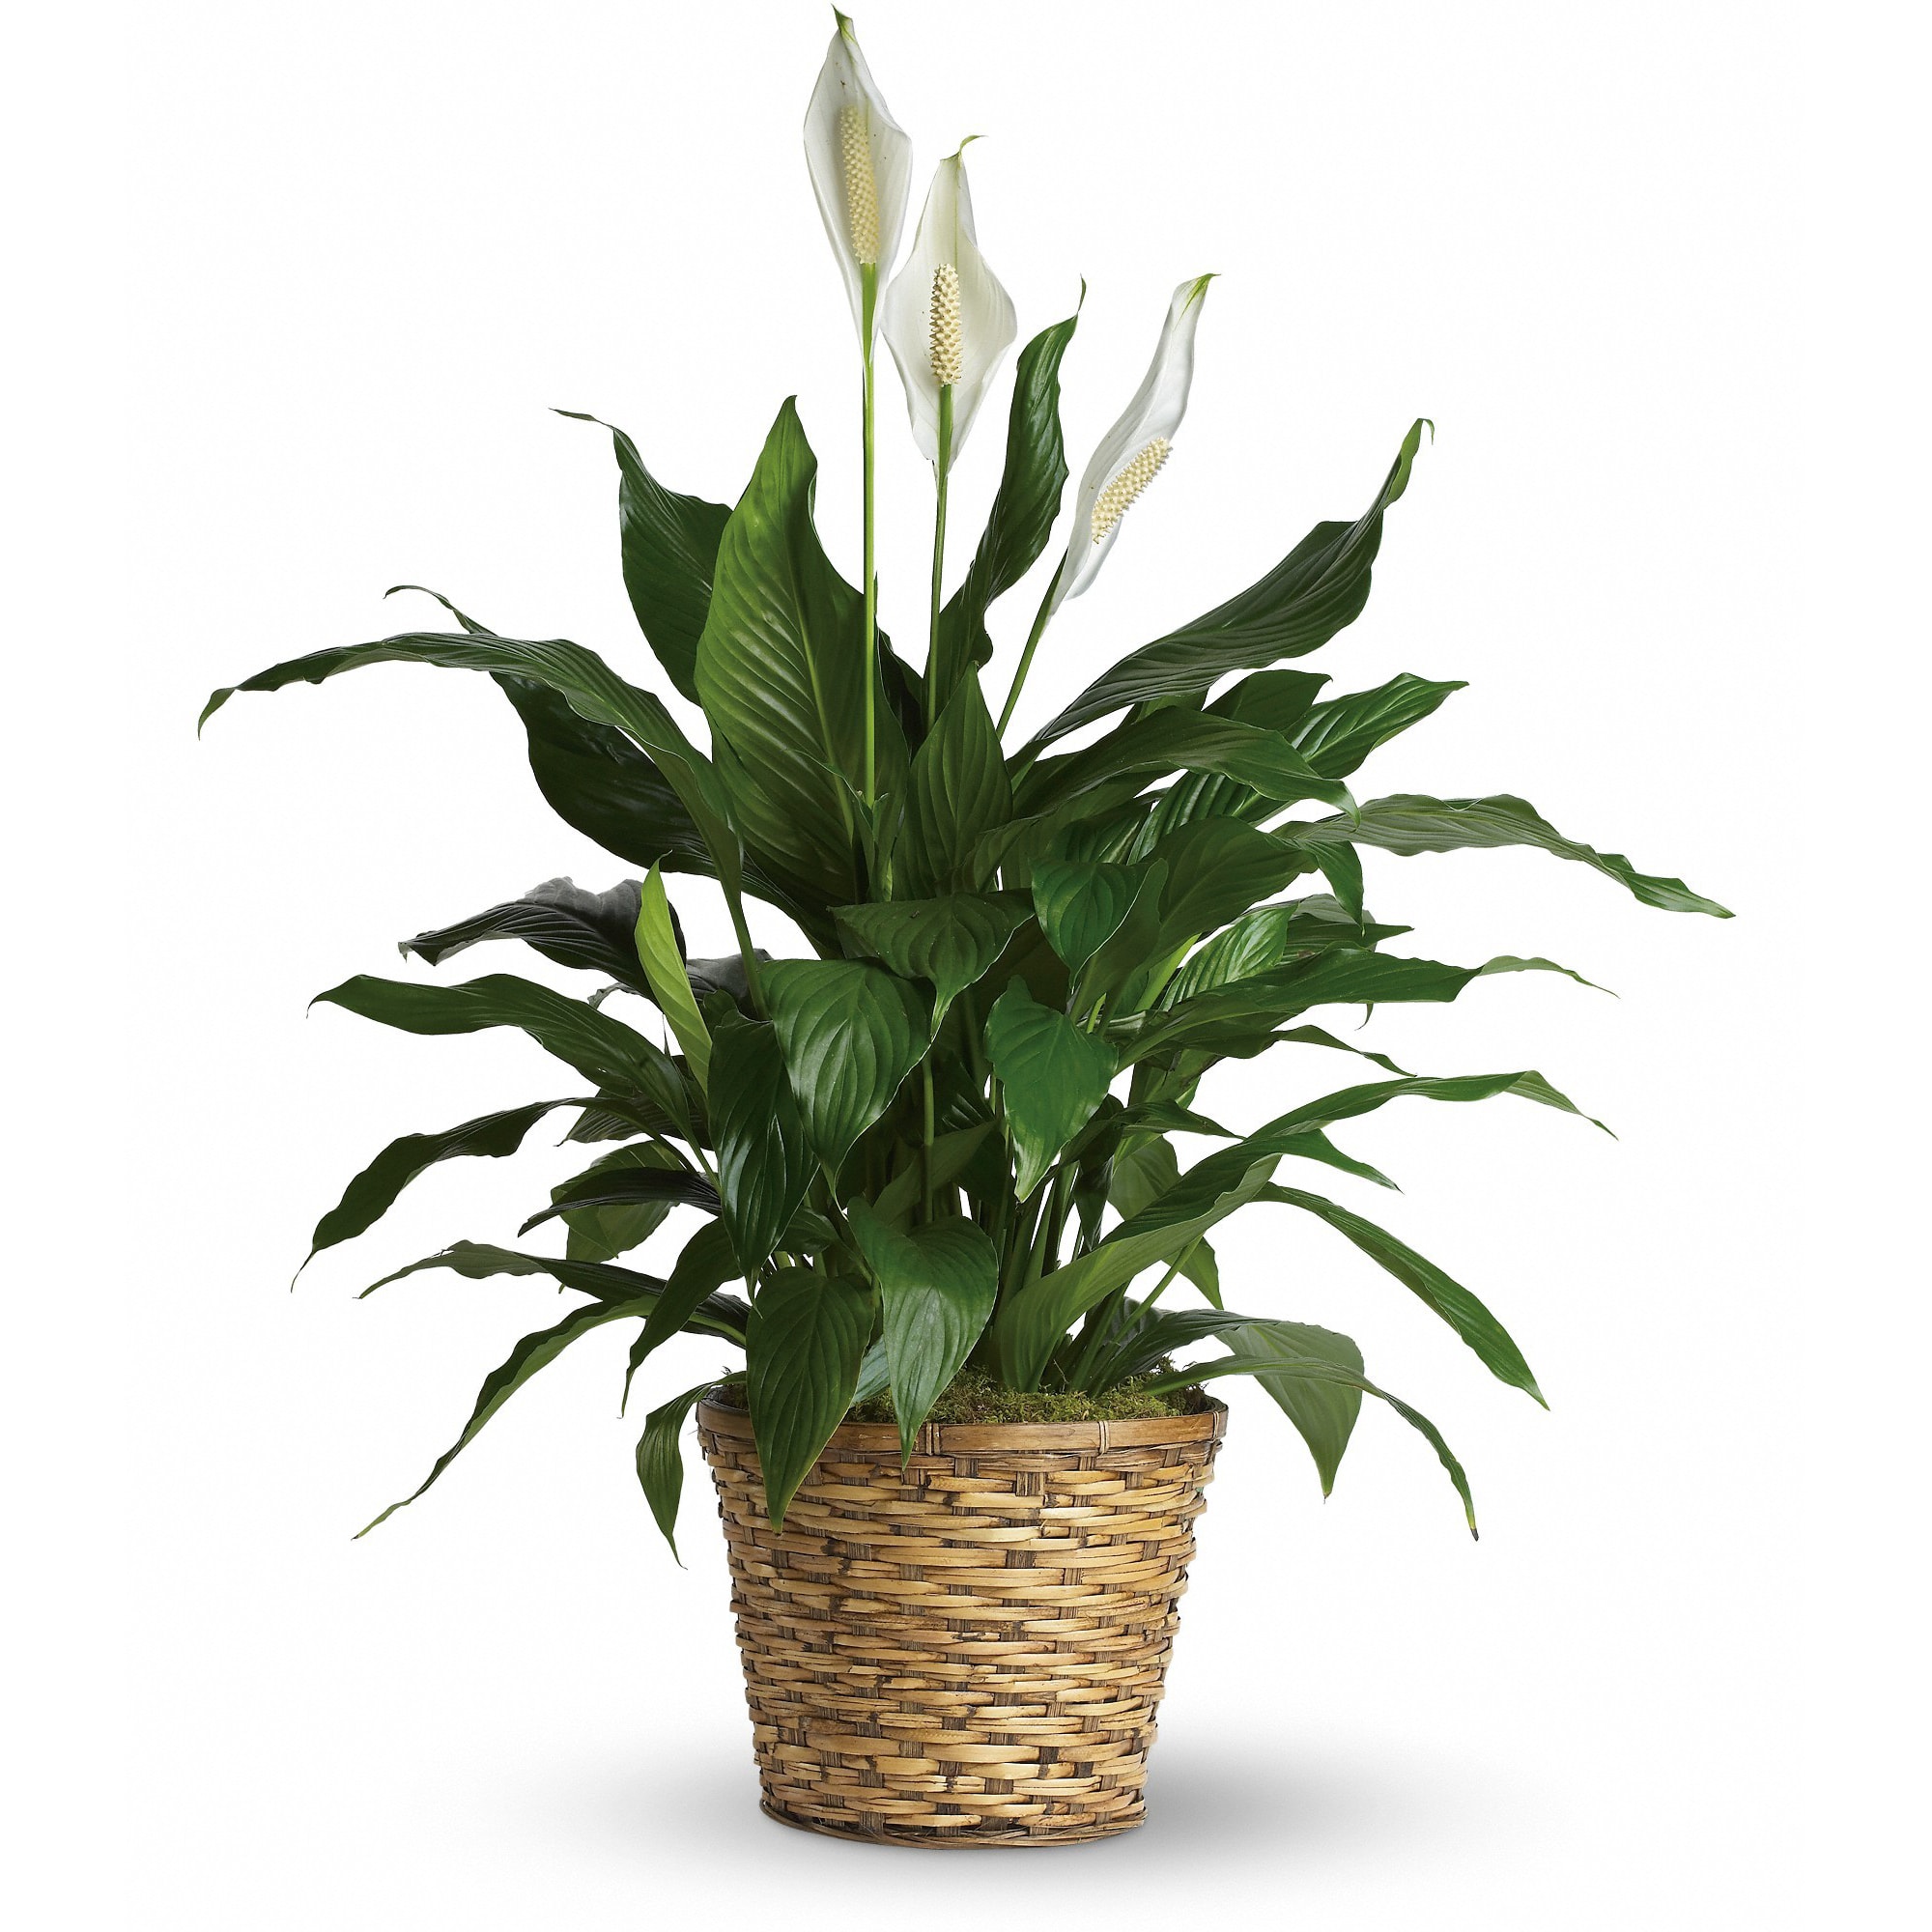 Spathiphyllum Medium - Known for its indoor beauty and ability to clear the air of contaminants, this brilliant green plant with dazzling white blossoms makes a perfect gift for almost any occasion. low-maintenance. High quality. Bet you never knew delivering elegance could be this simple.  This spathiphyllum comes in an 8&quot; woven wicker basket. It's a great medium for delivering vitality.  Approximately 30 1/2&quot; W x 37&quot; H  Orientation: N/A  As Shown : T105-2A